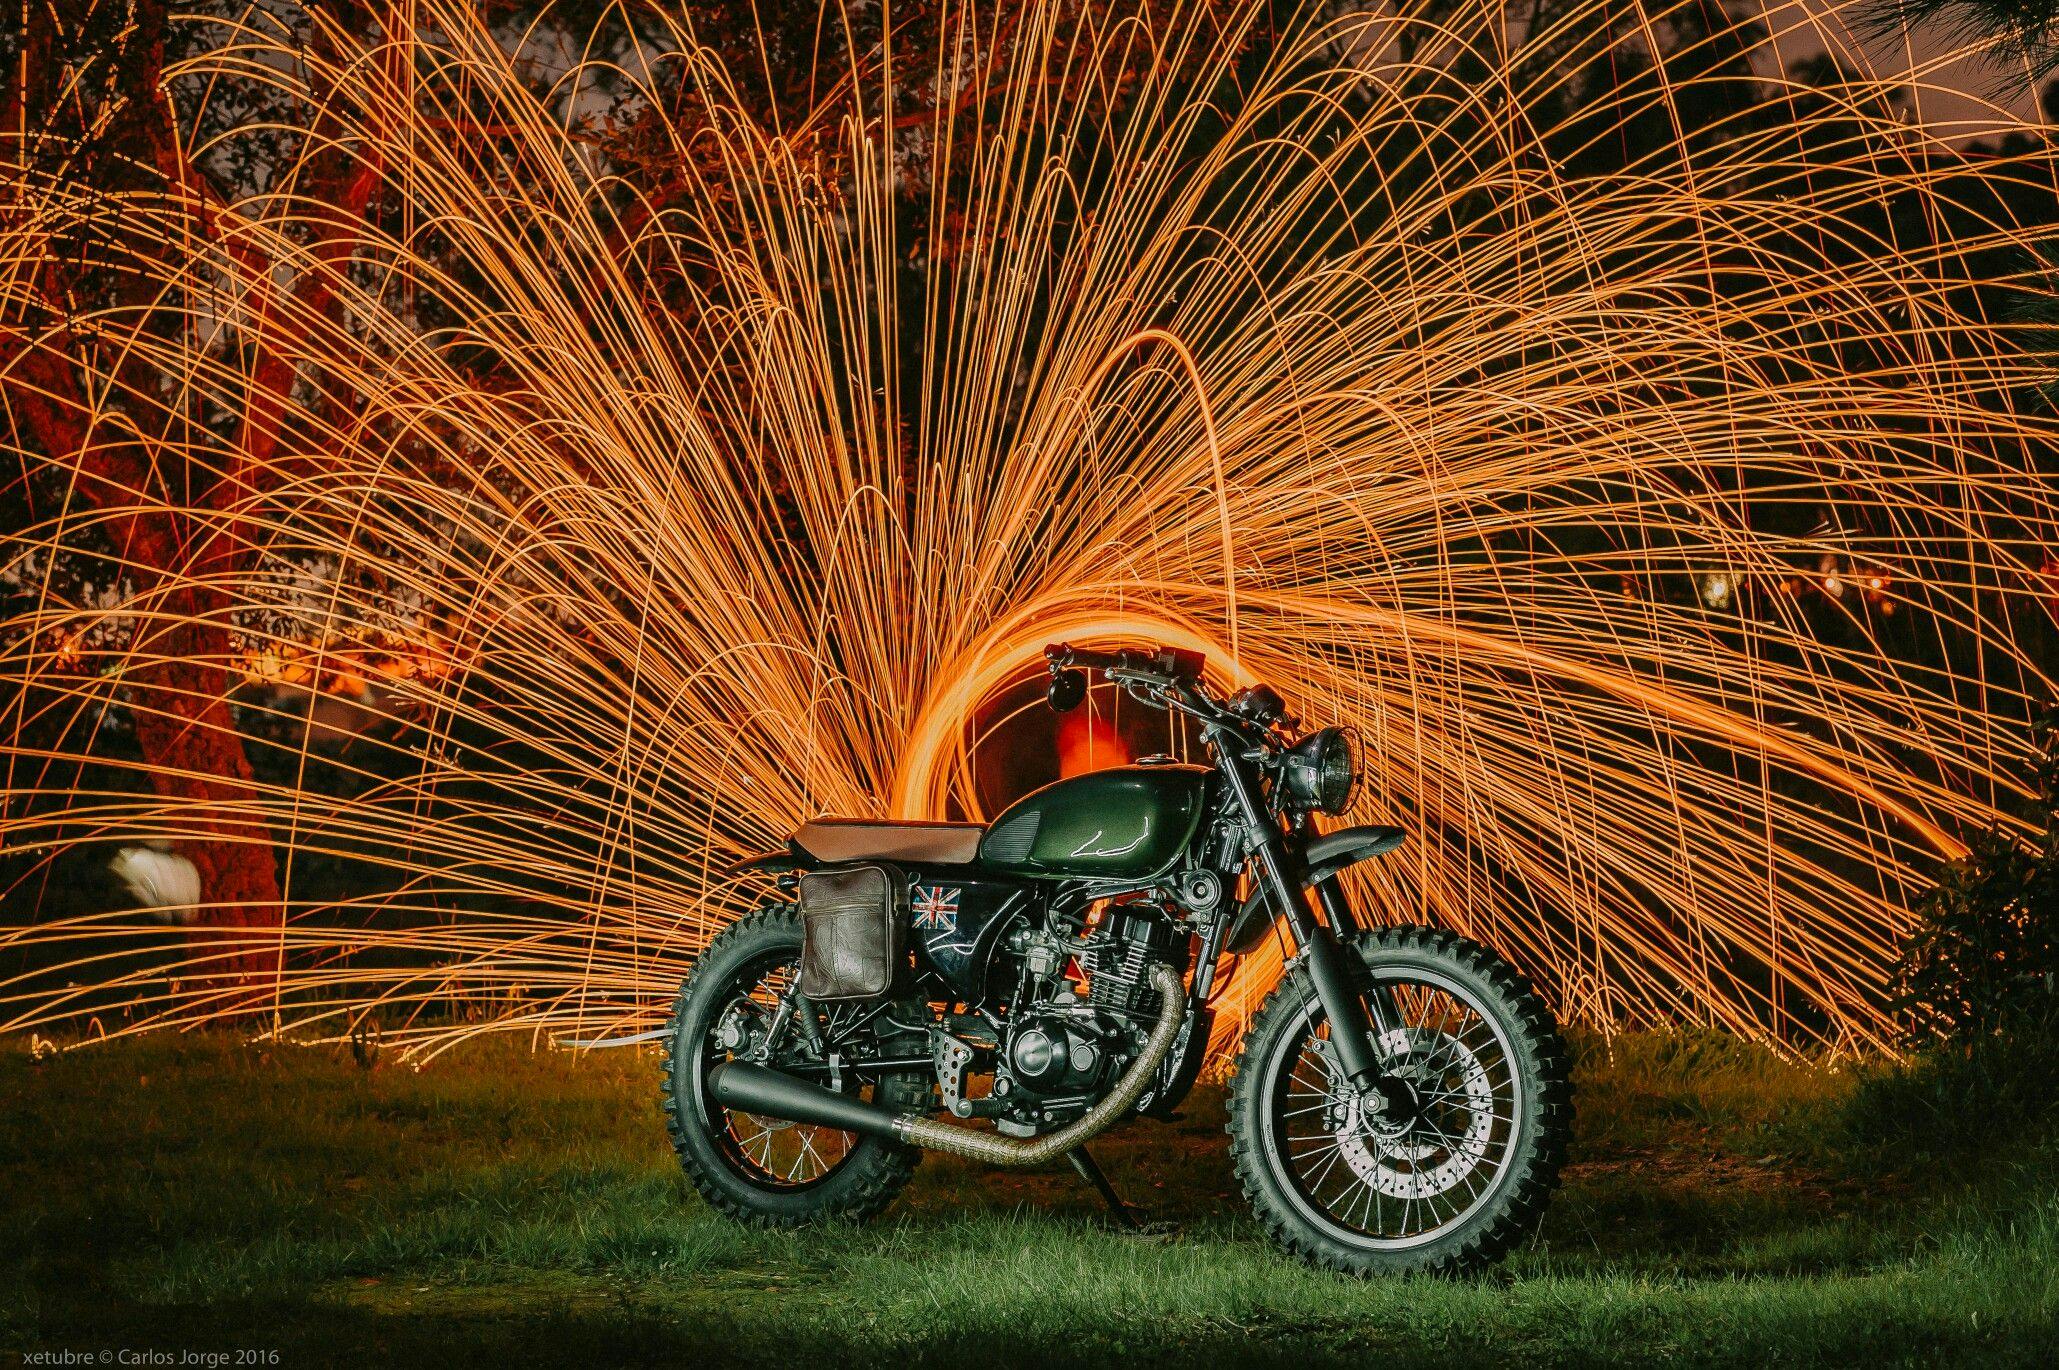 Old school motorcycle with orange fireworks in the background